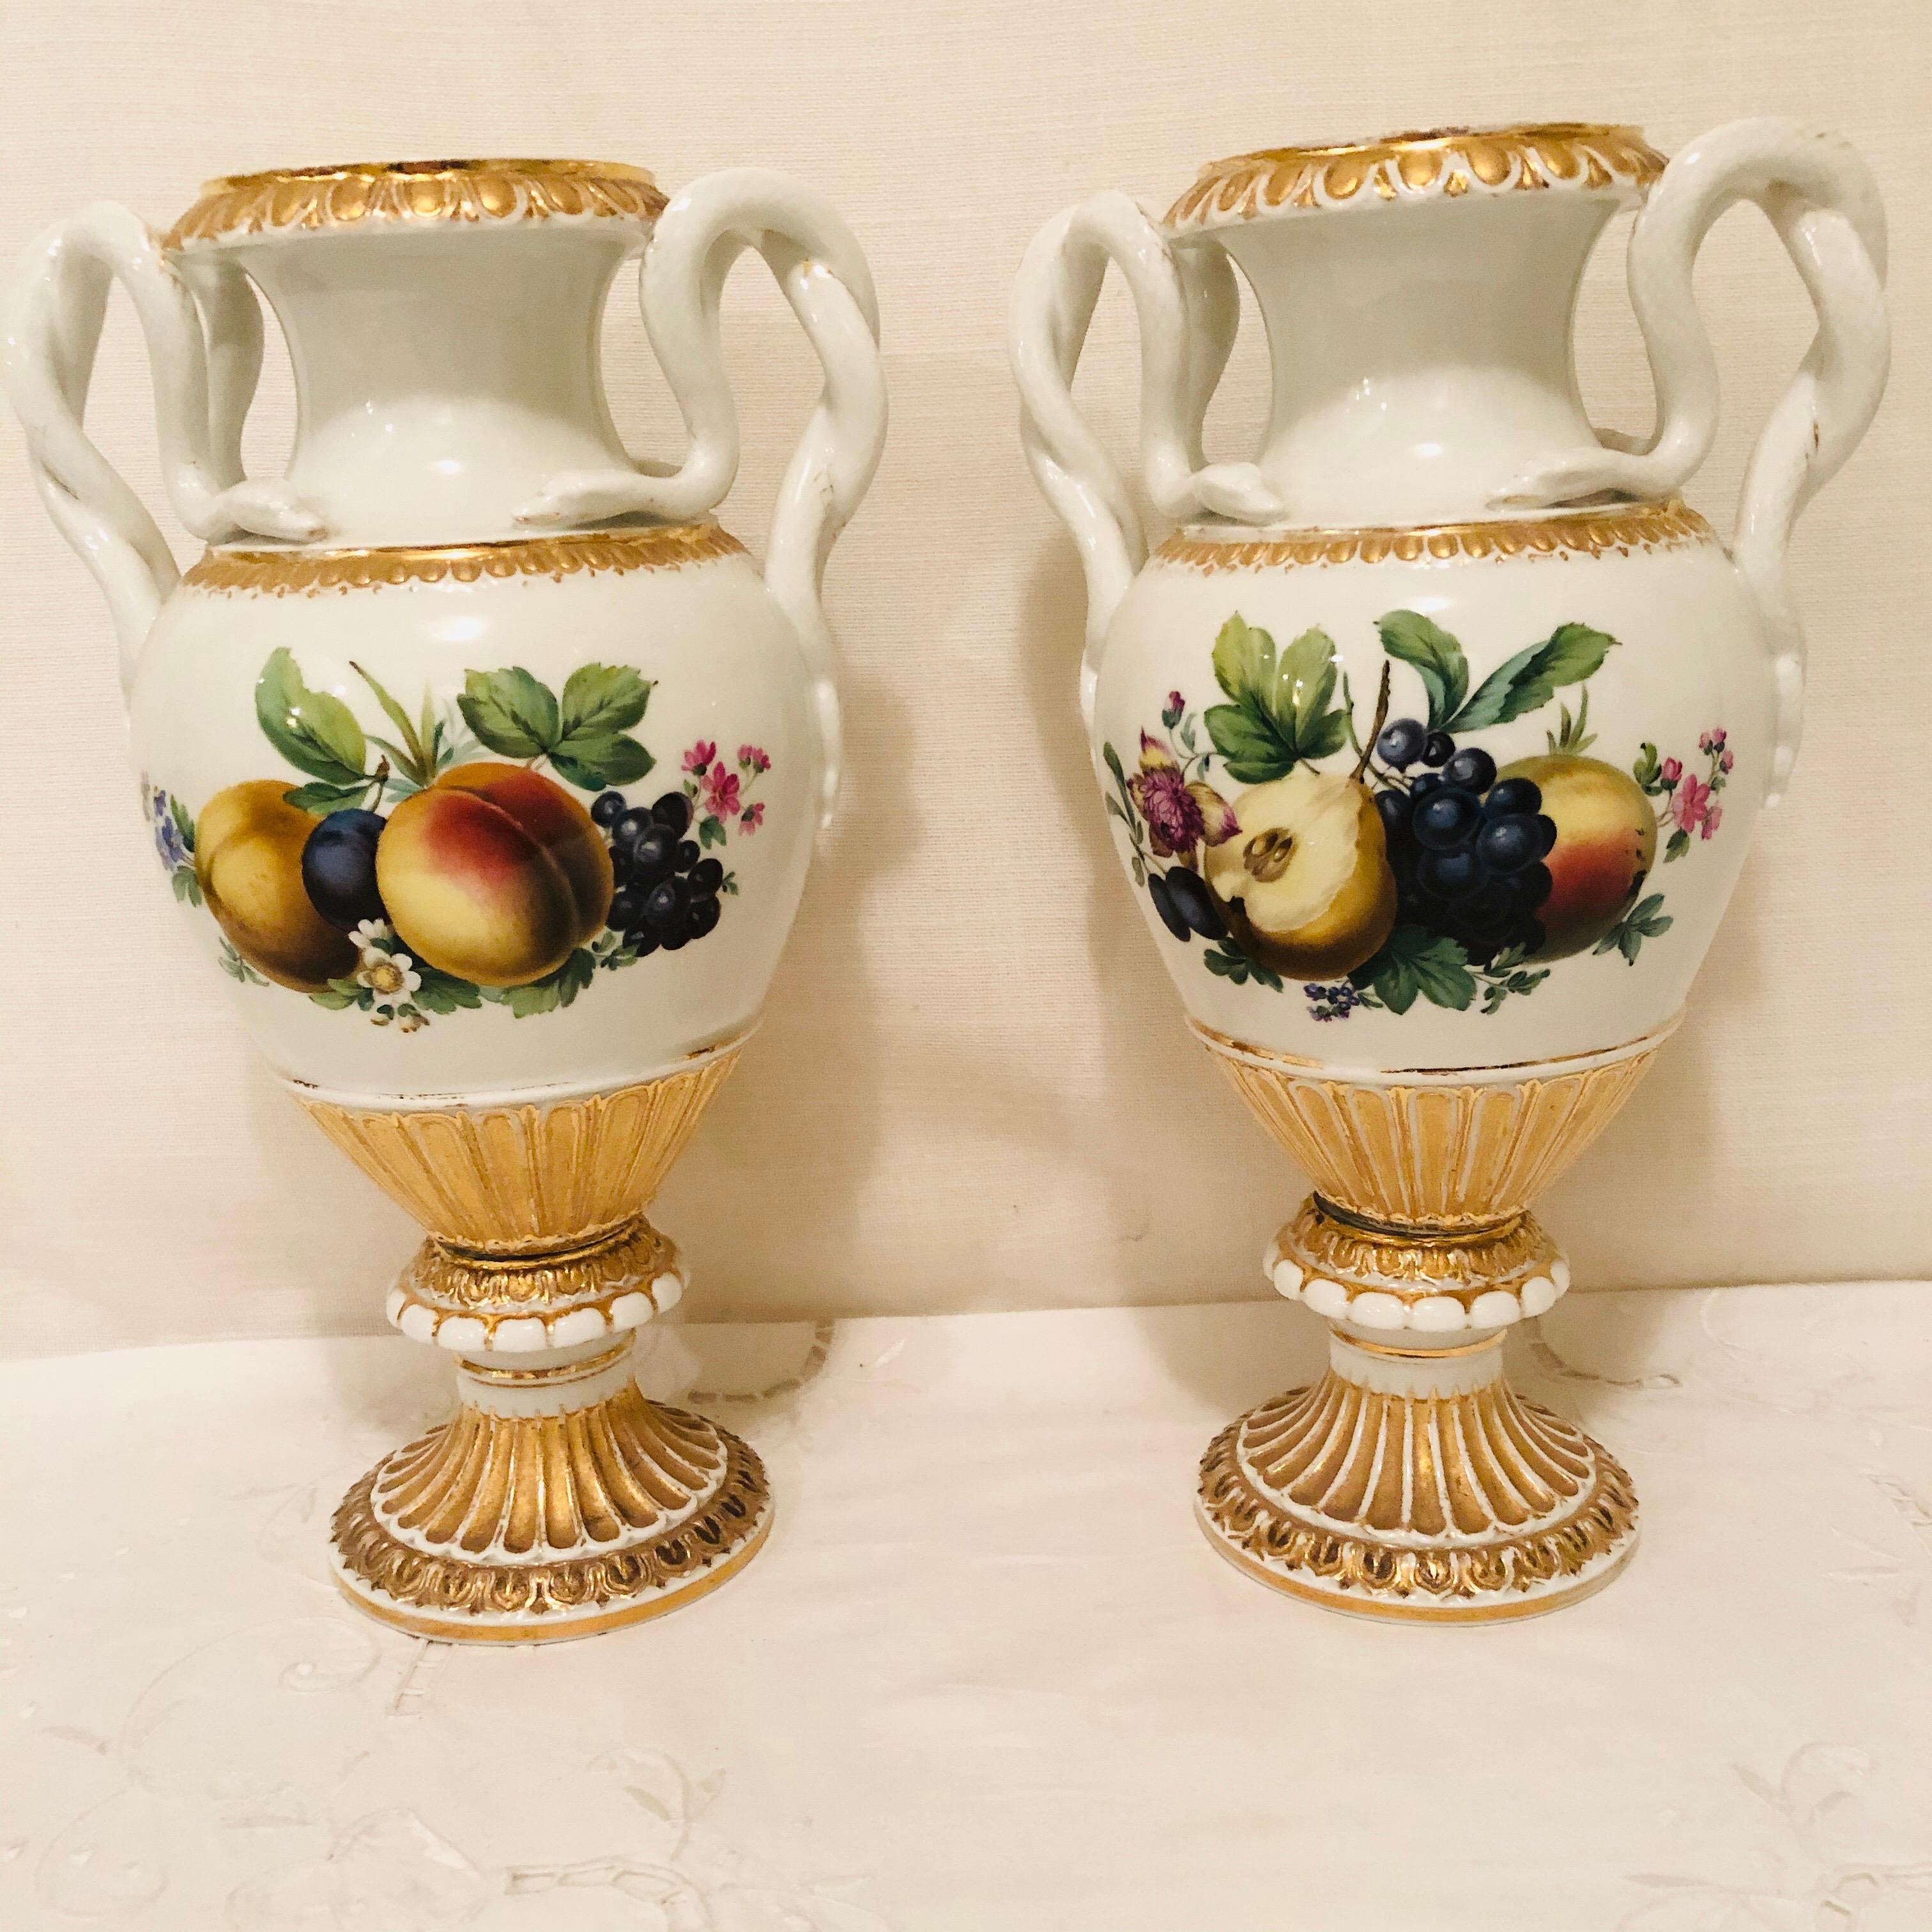 Porcelain Pair of Meissen Vases with Snake Handles and Different Fruit Paintings